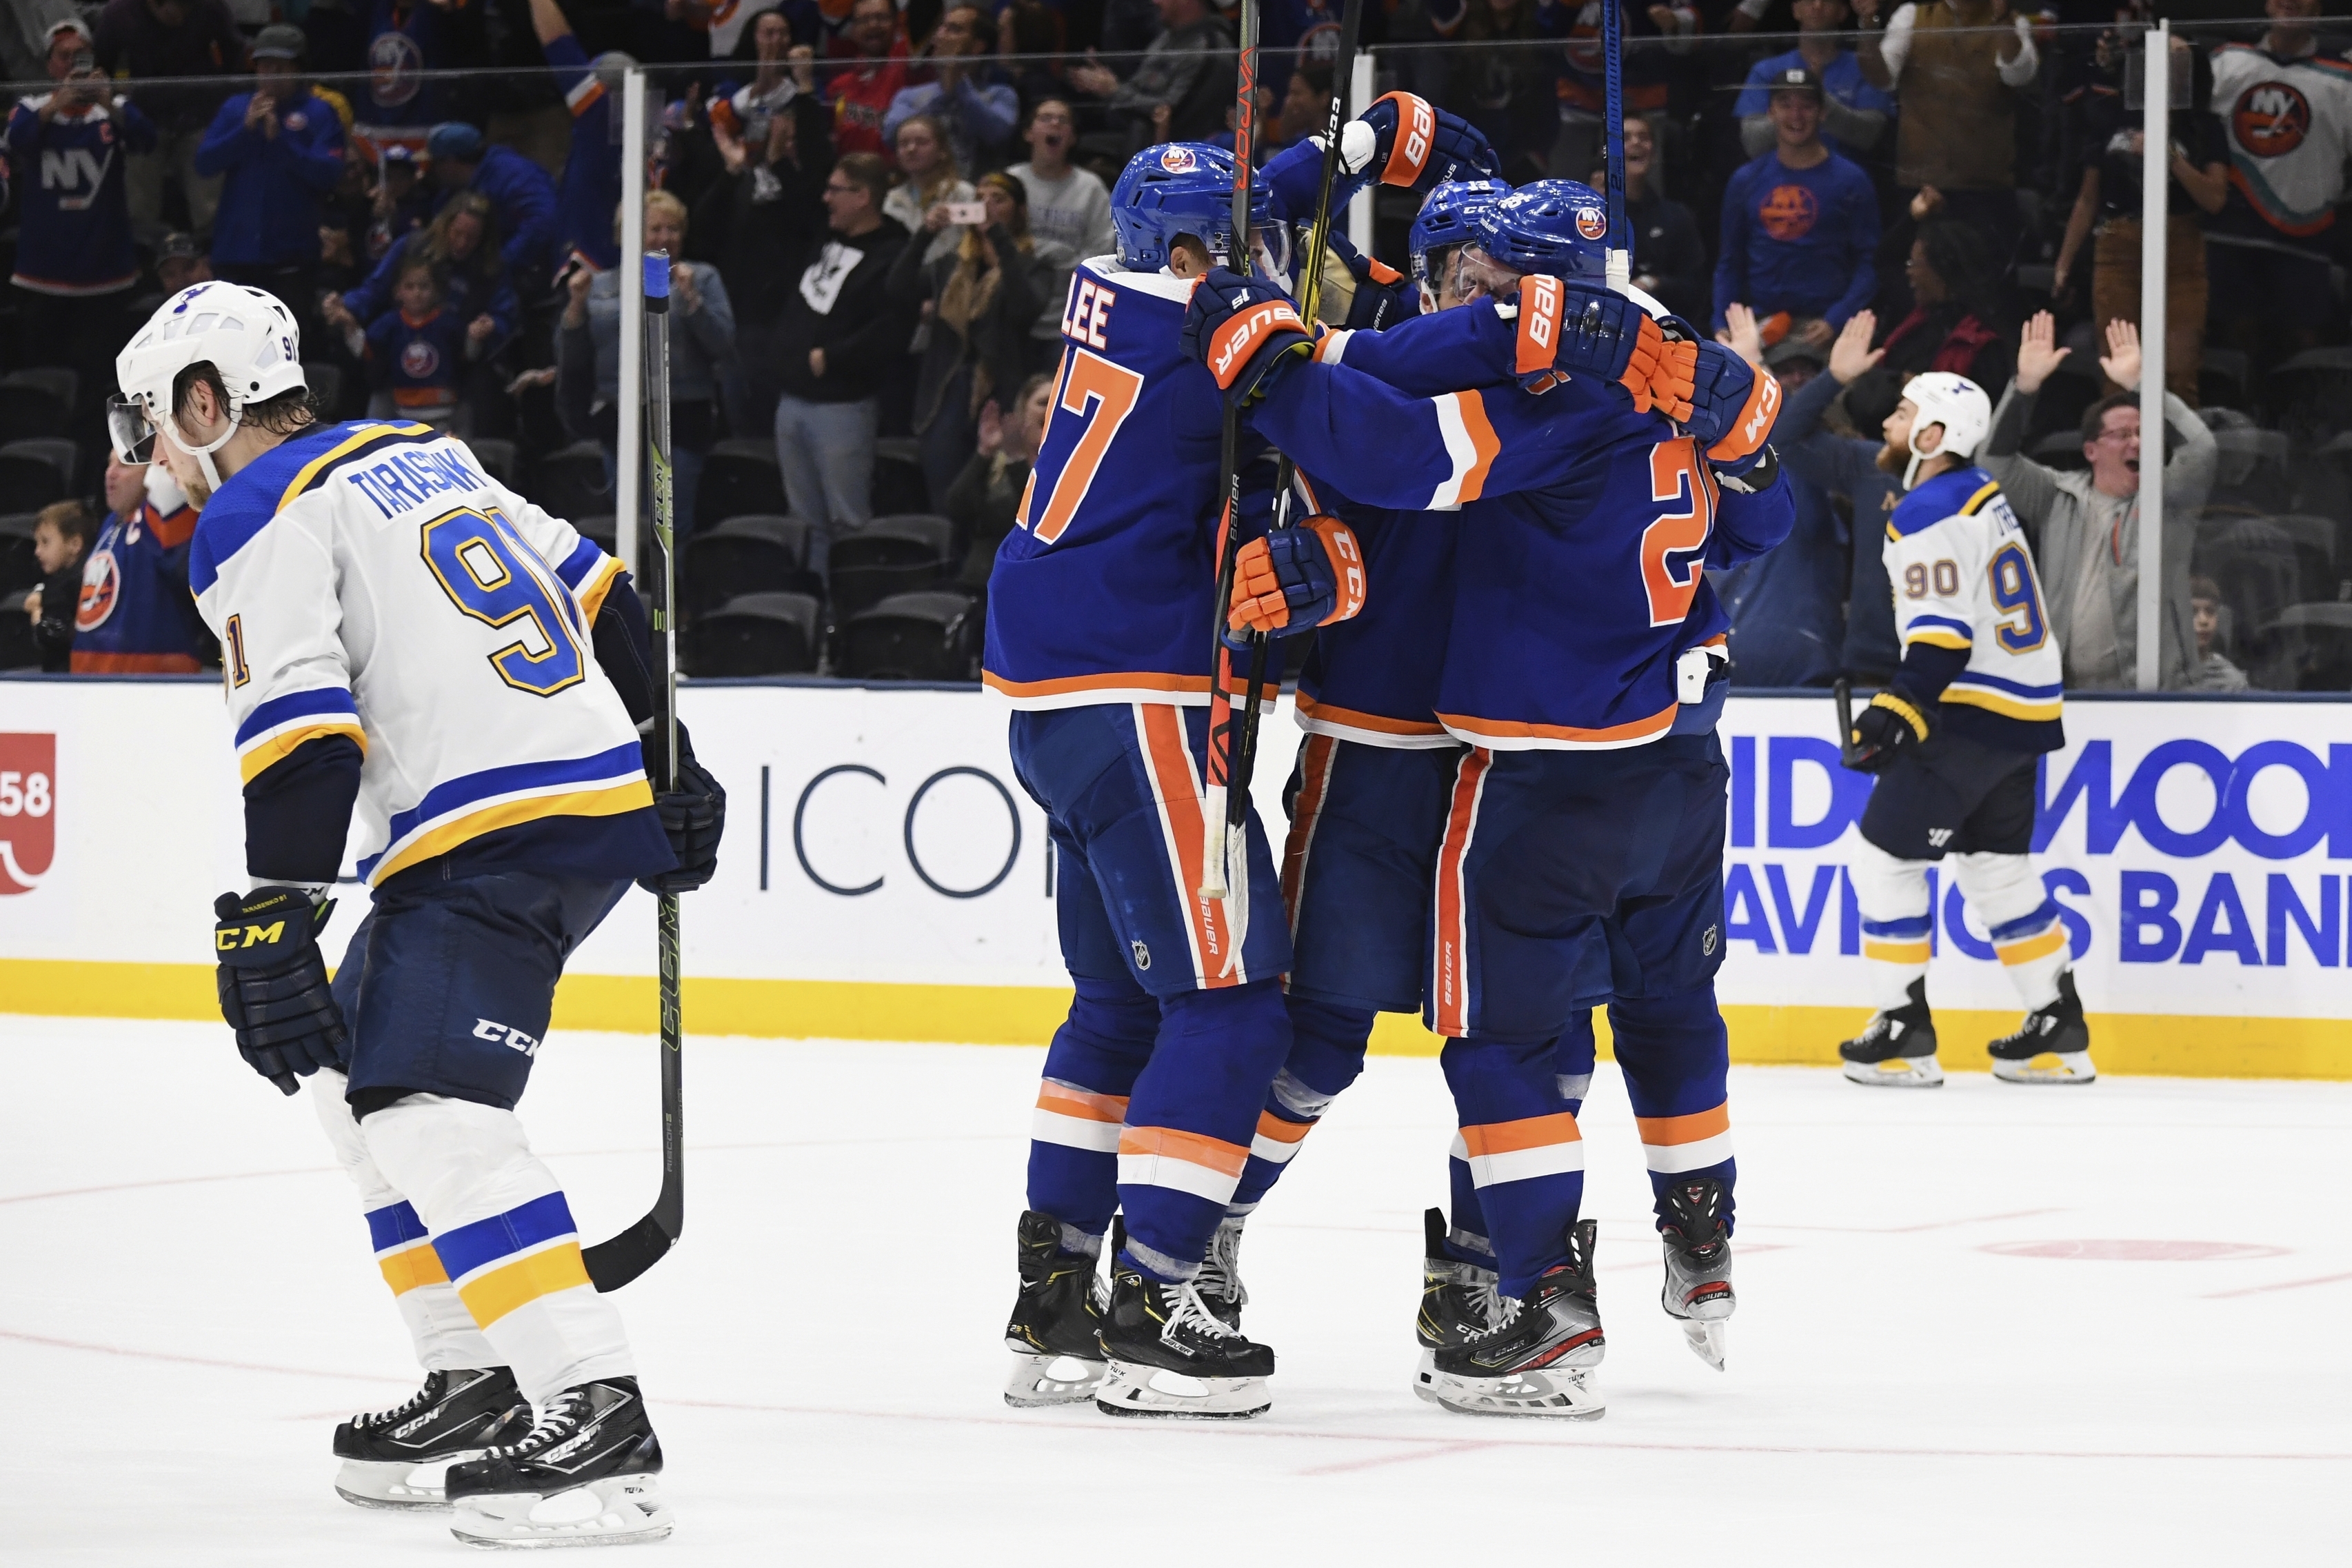 Isles rally past Blues in OT; Bruins' Pastrnak scores 4